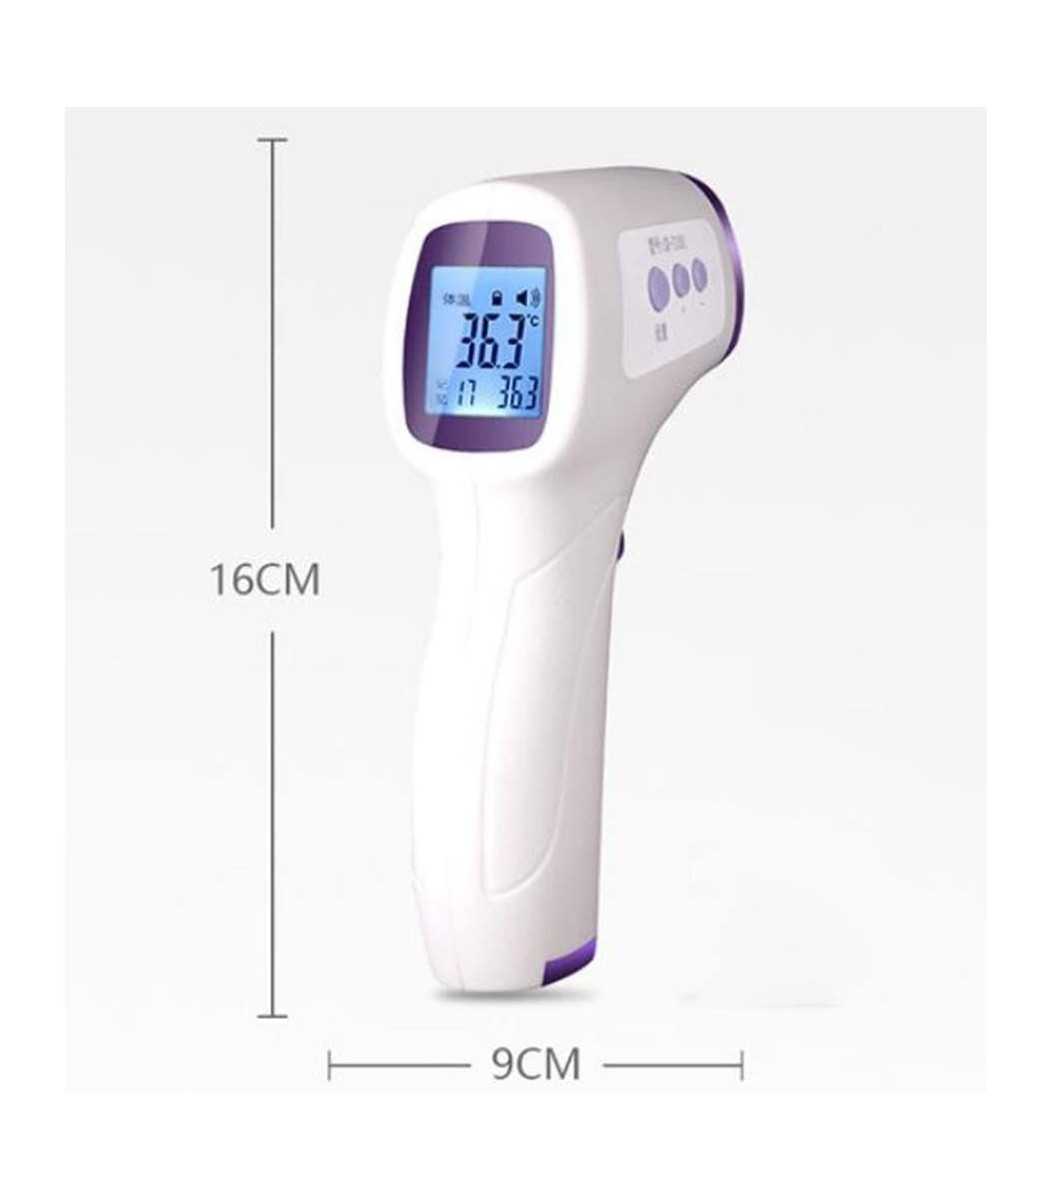 Infrared Thermometer CK-T1503 and CK-T1501, Non Contact Laser